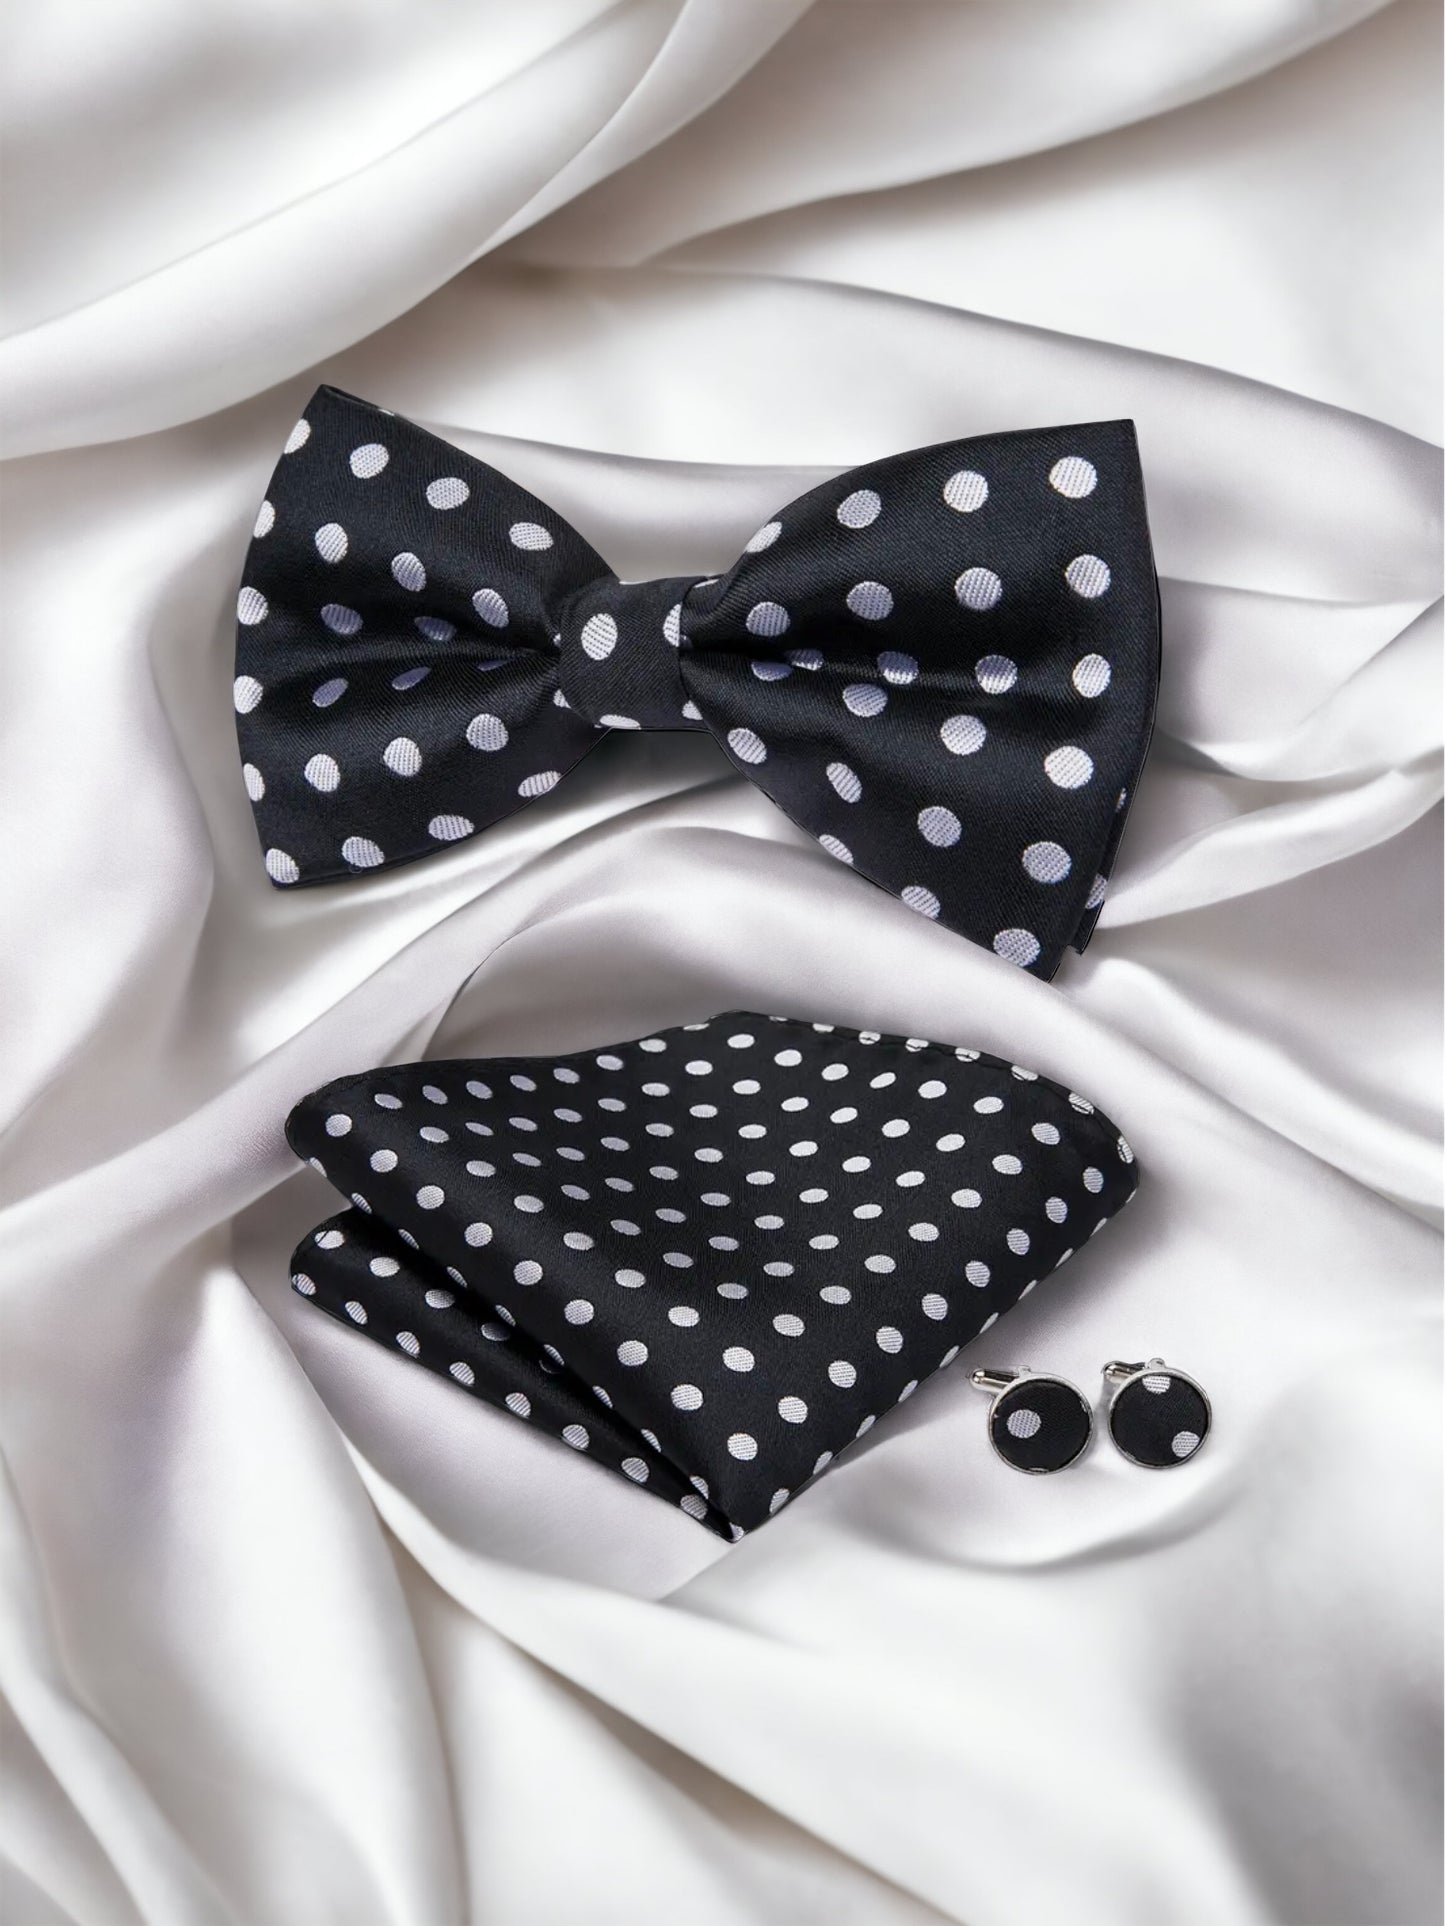 Men’s Silk Coordinated Black Bow Tie Set - Black with White Polka Dots 0755